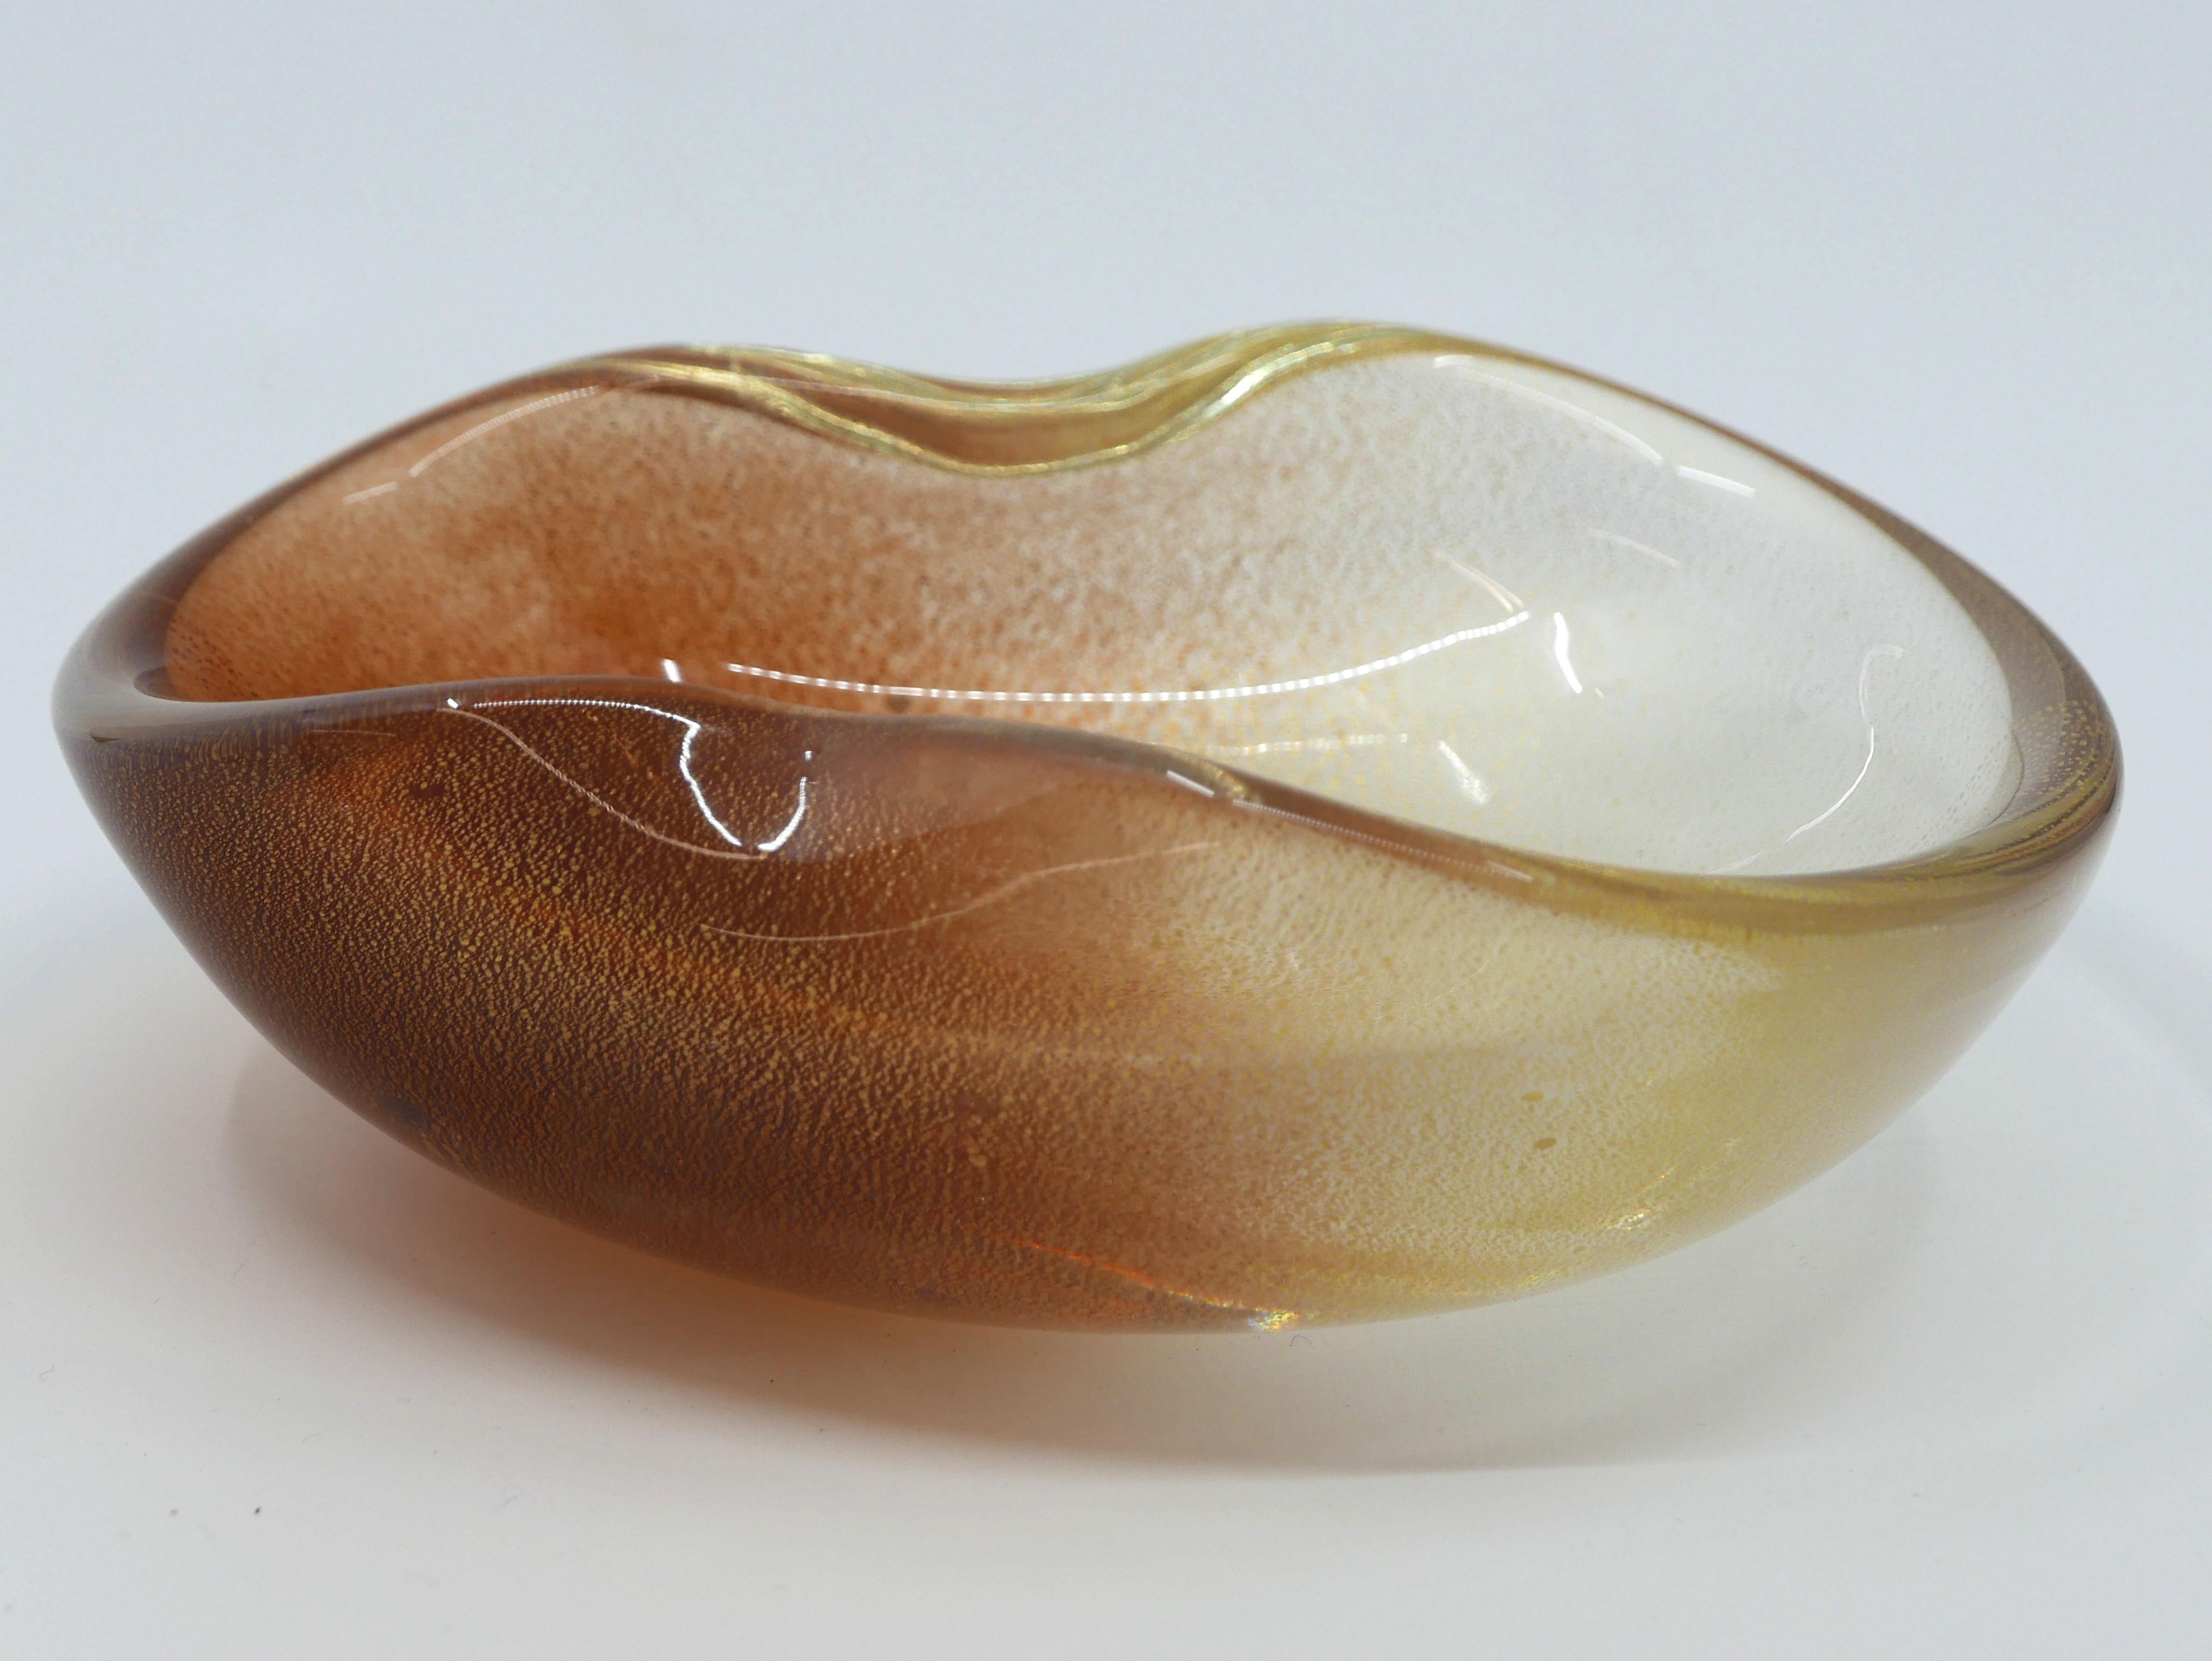 A rare Murano glass bowl of the Polveri series first introduced by Archimede Seguso in 1953, featuring lear glass with a unique fade made using glass powder and gold leaf inclusions.
Lit.:
umberto franzoi, art glass by archimede seguso, verona